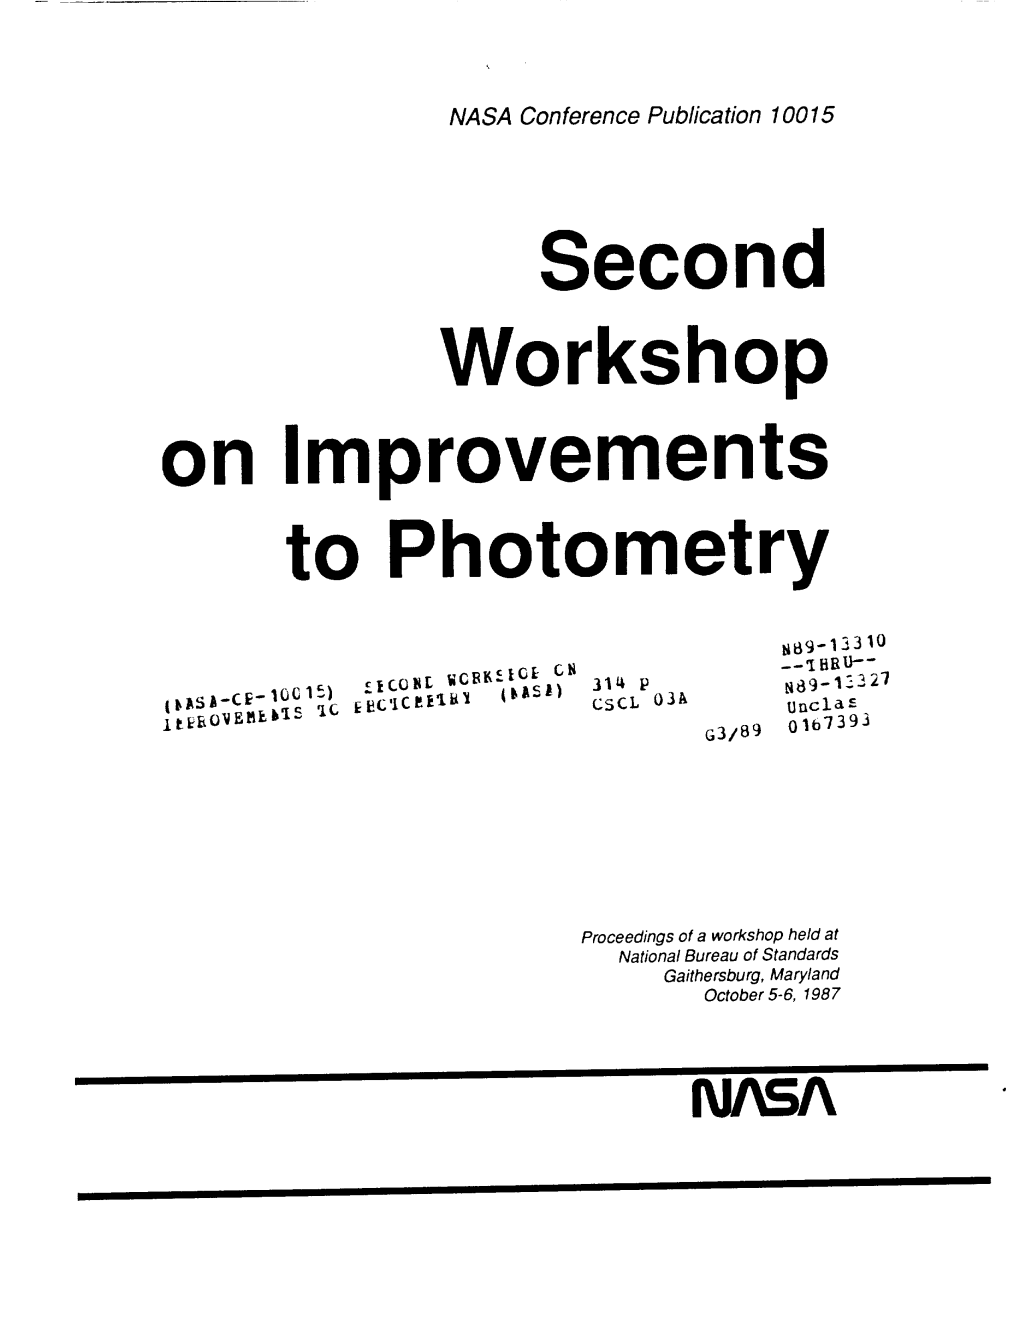 Second Workshop on Improvements to Photometry